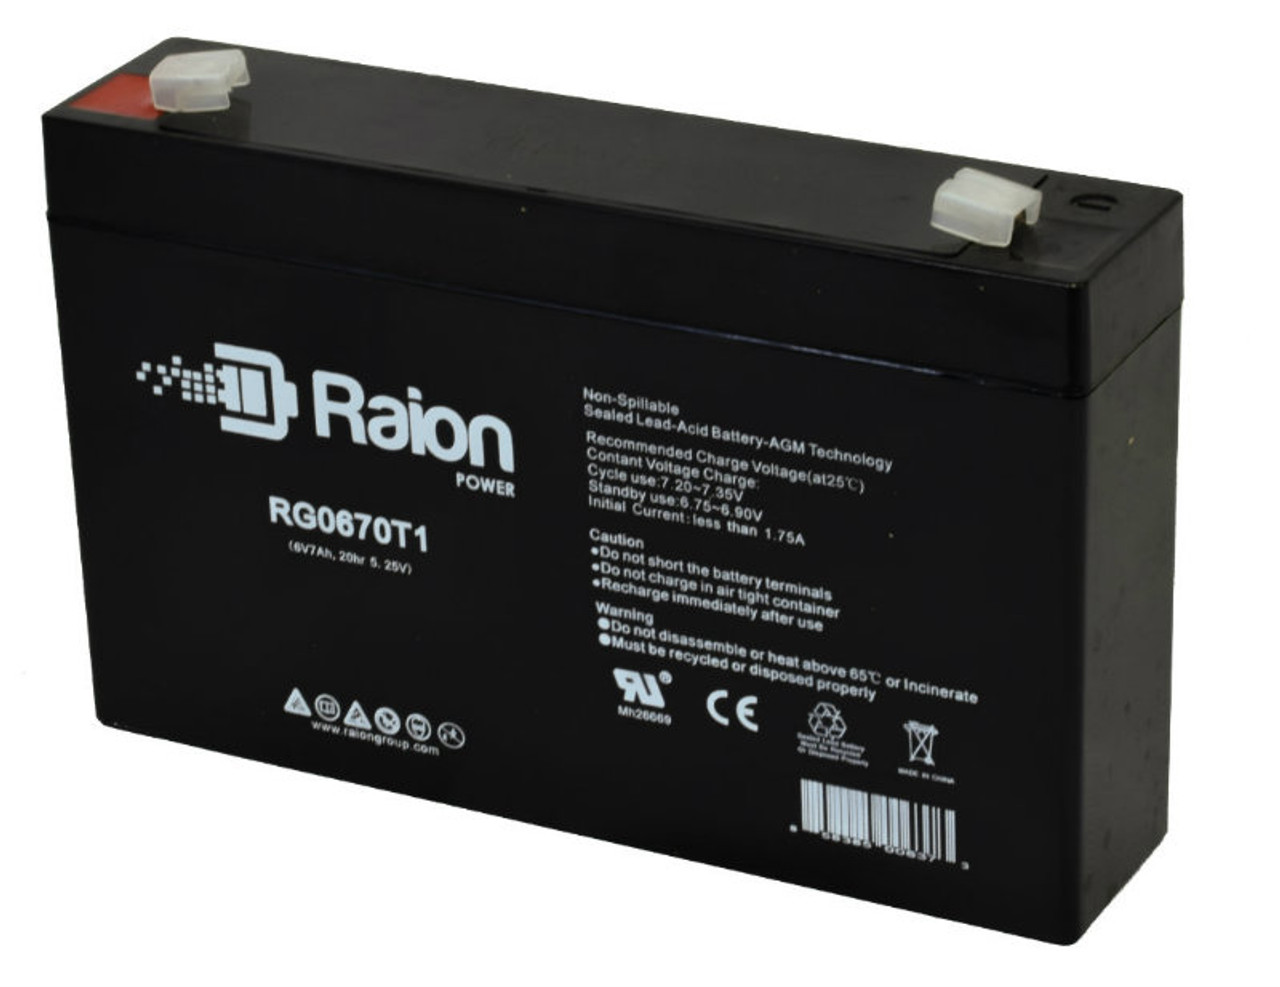 Raion Power RG0670T1 6V 7Ah Replacement Emergency Lighting Battery for Sure-Lites A12